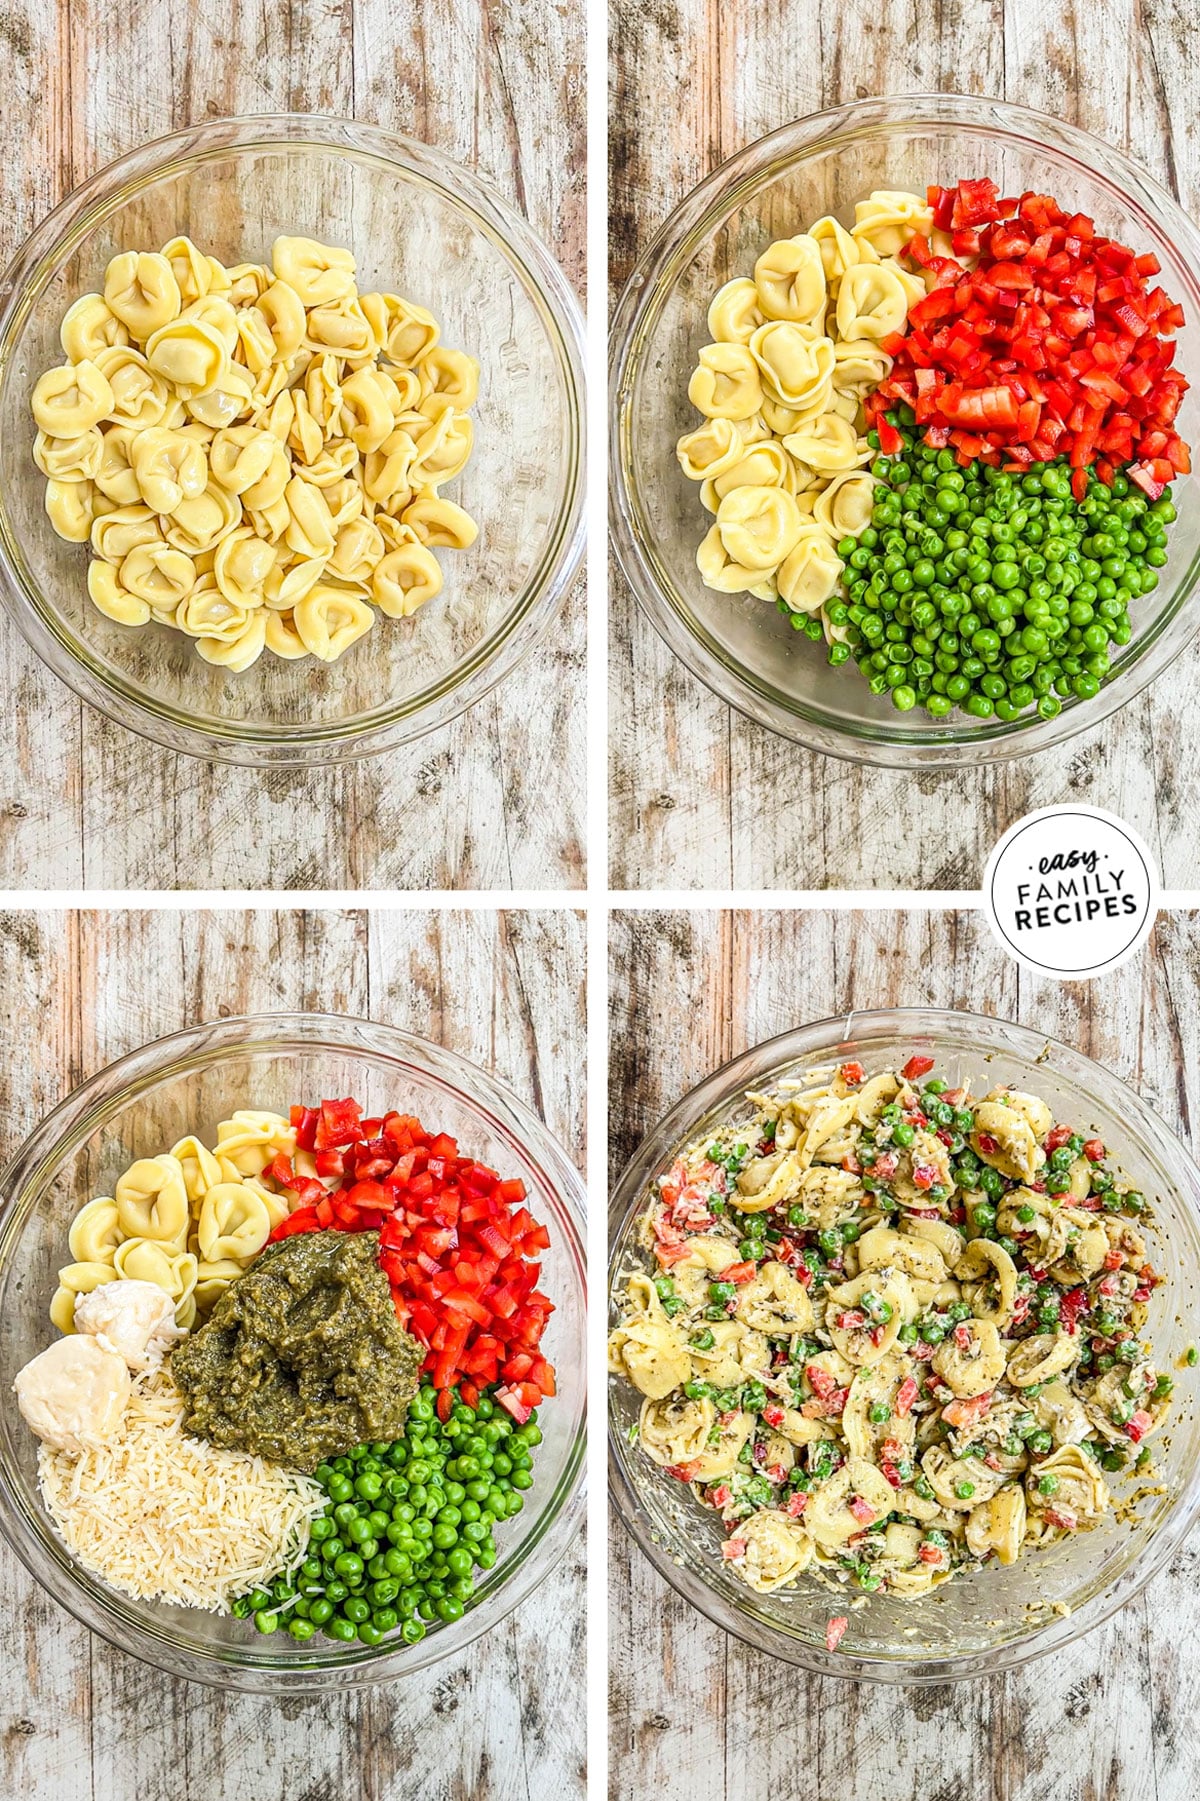 how to make pesto tortellini salad 1) add tortellini to a bowl, 2) add peppers and peas, 3) add pesto, mayonnaise, and parmesan, 4) mix to combine.